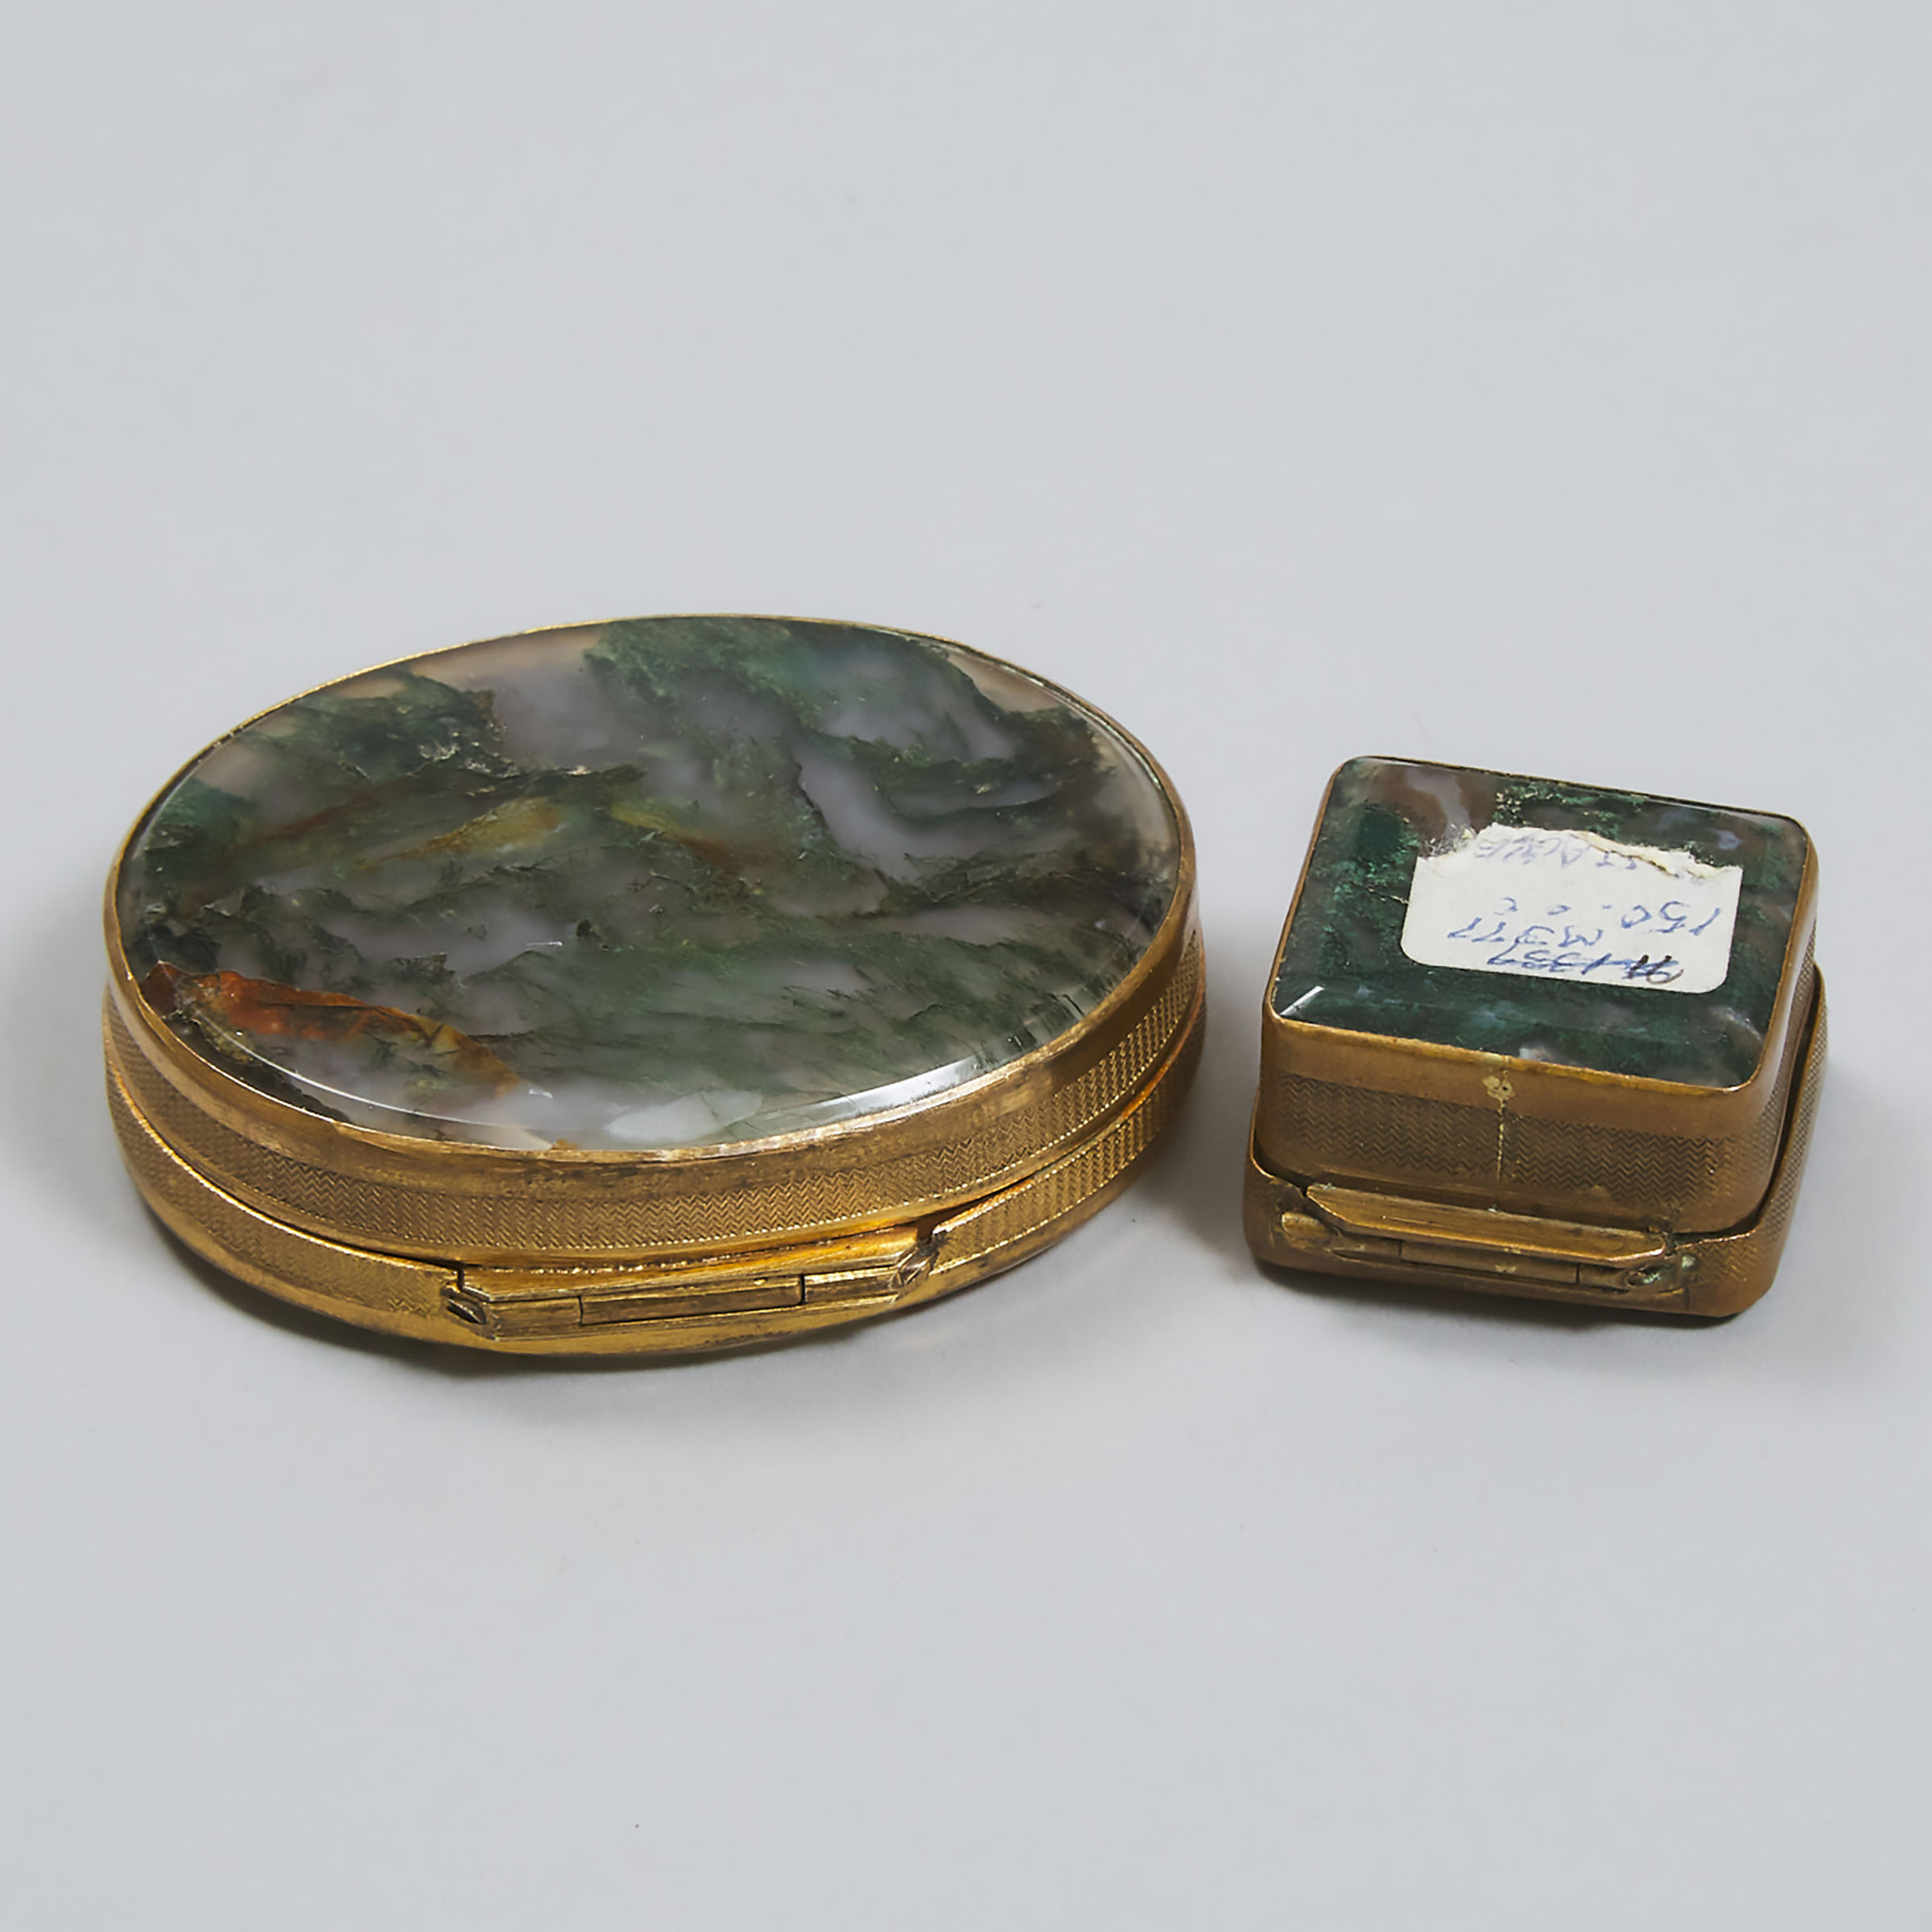 Two Moss Agate Panelled Gilt Metal Snuff Boxes, 19th/early 20th century